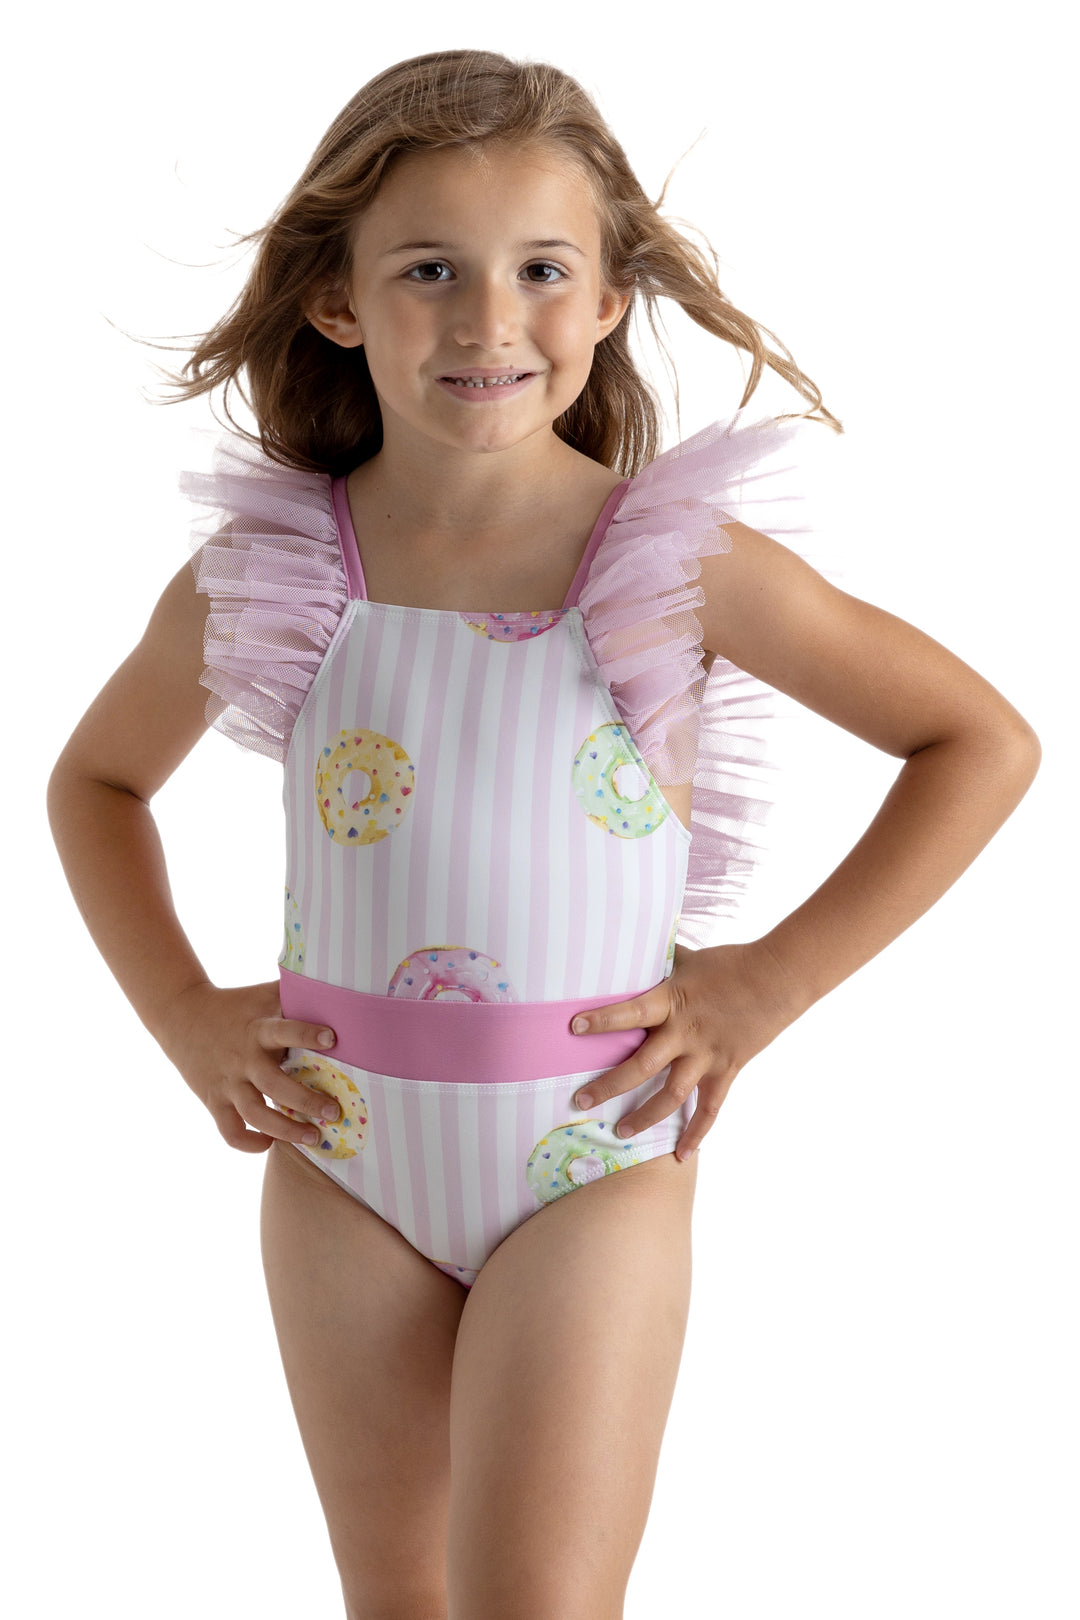 Meia Pata PREORDER DONUTS "Pasion" Swimsuit | Millie and John